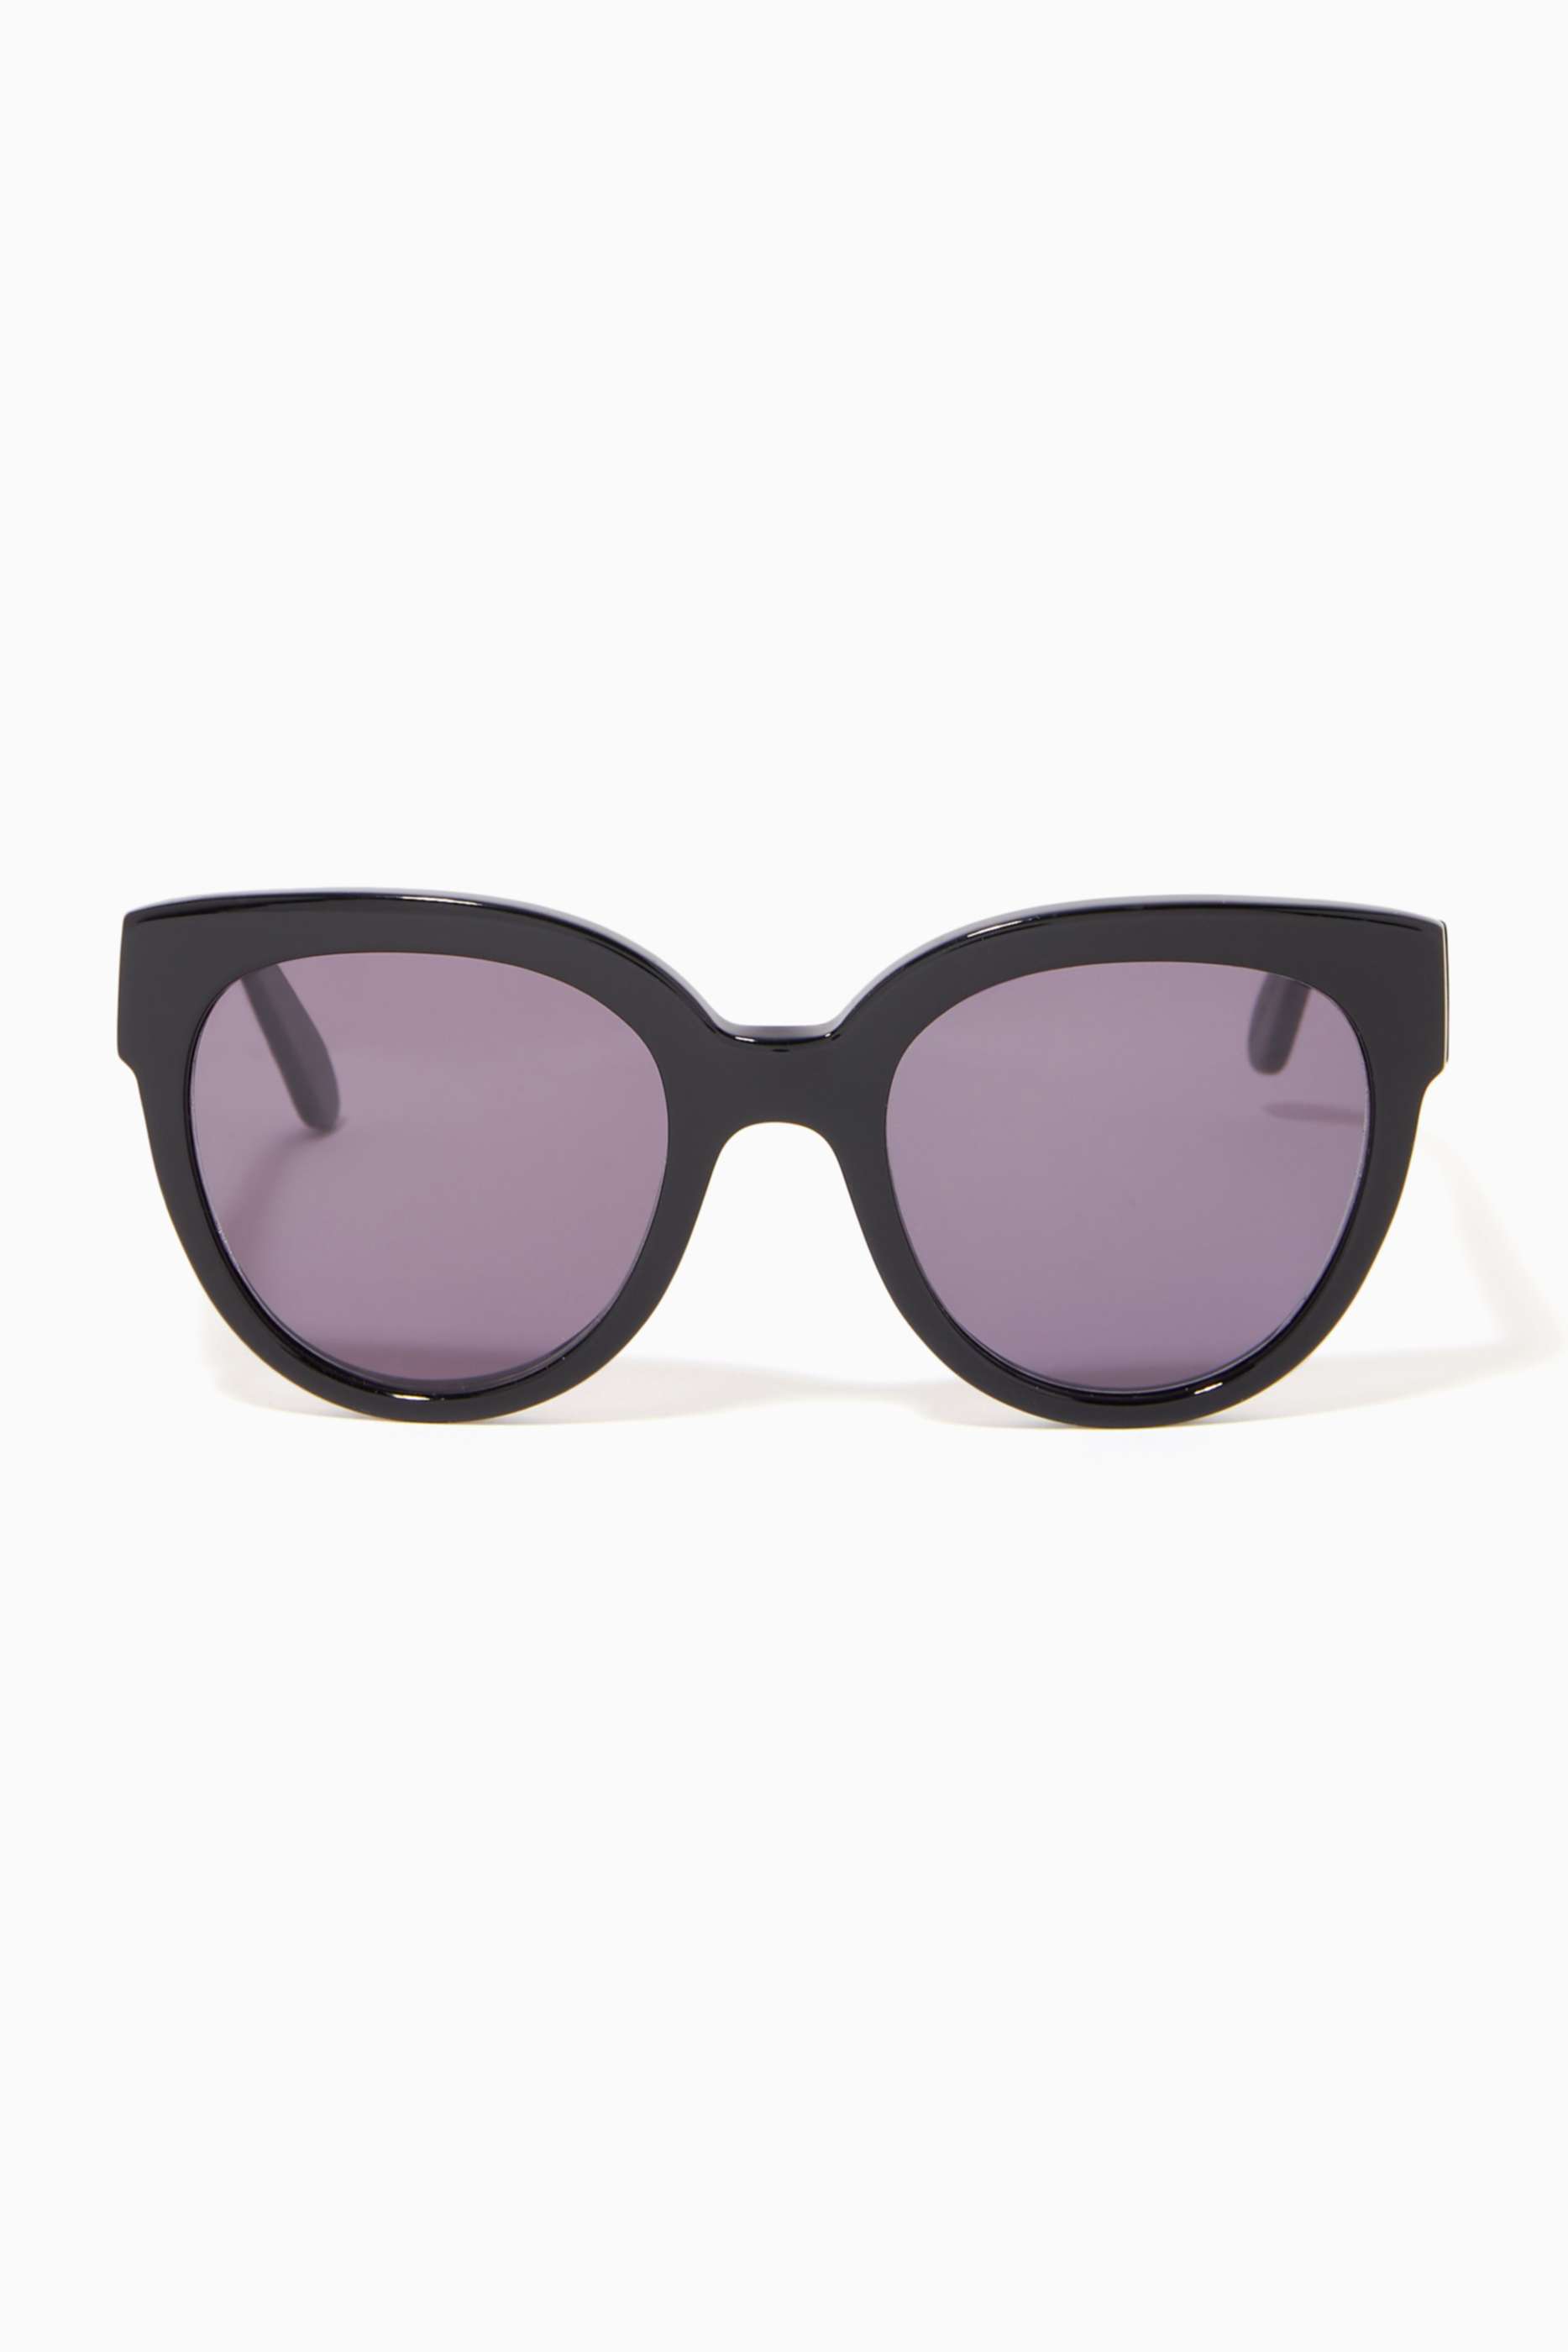 shop-jimmy-fairly-the-felice-sunglasses-in-acetate-for-unisex